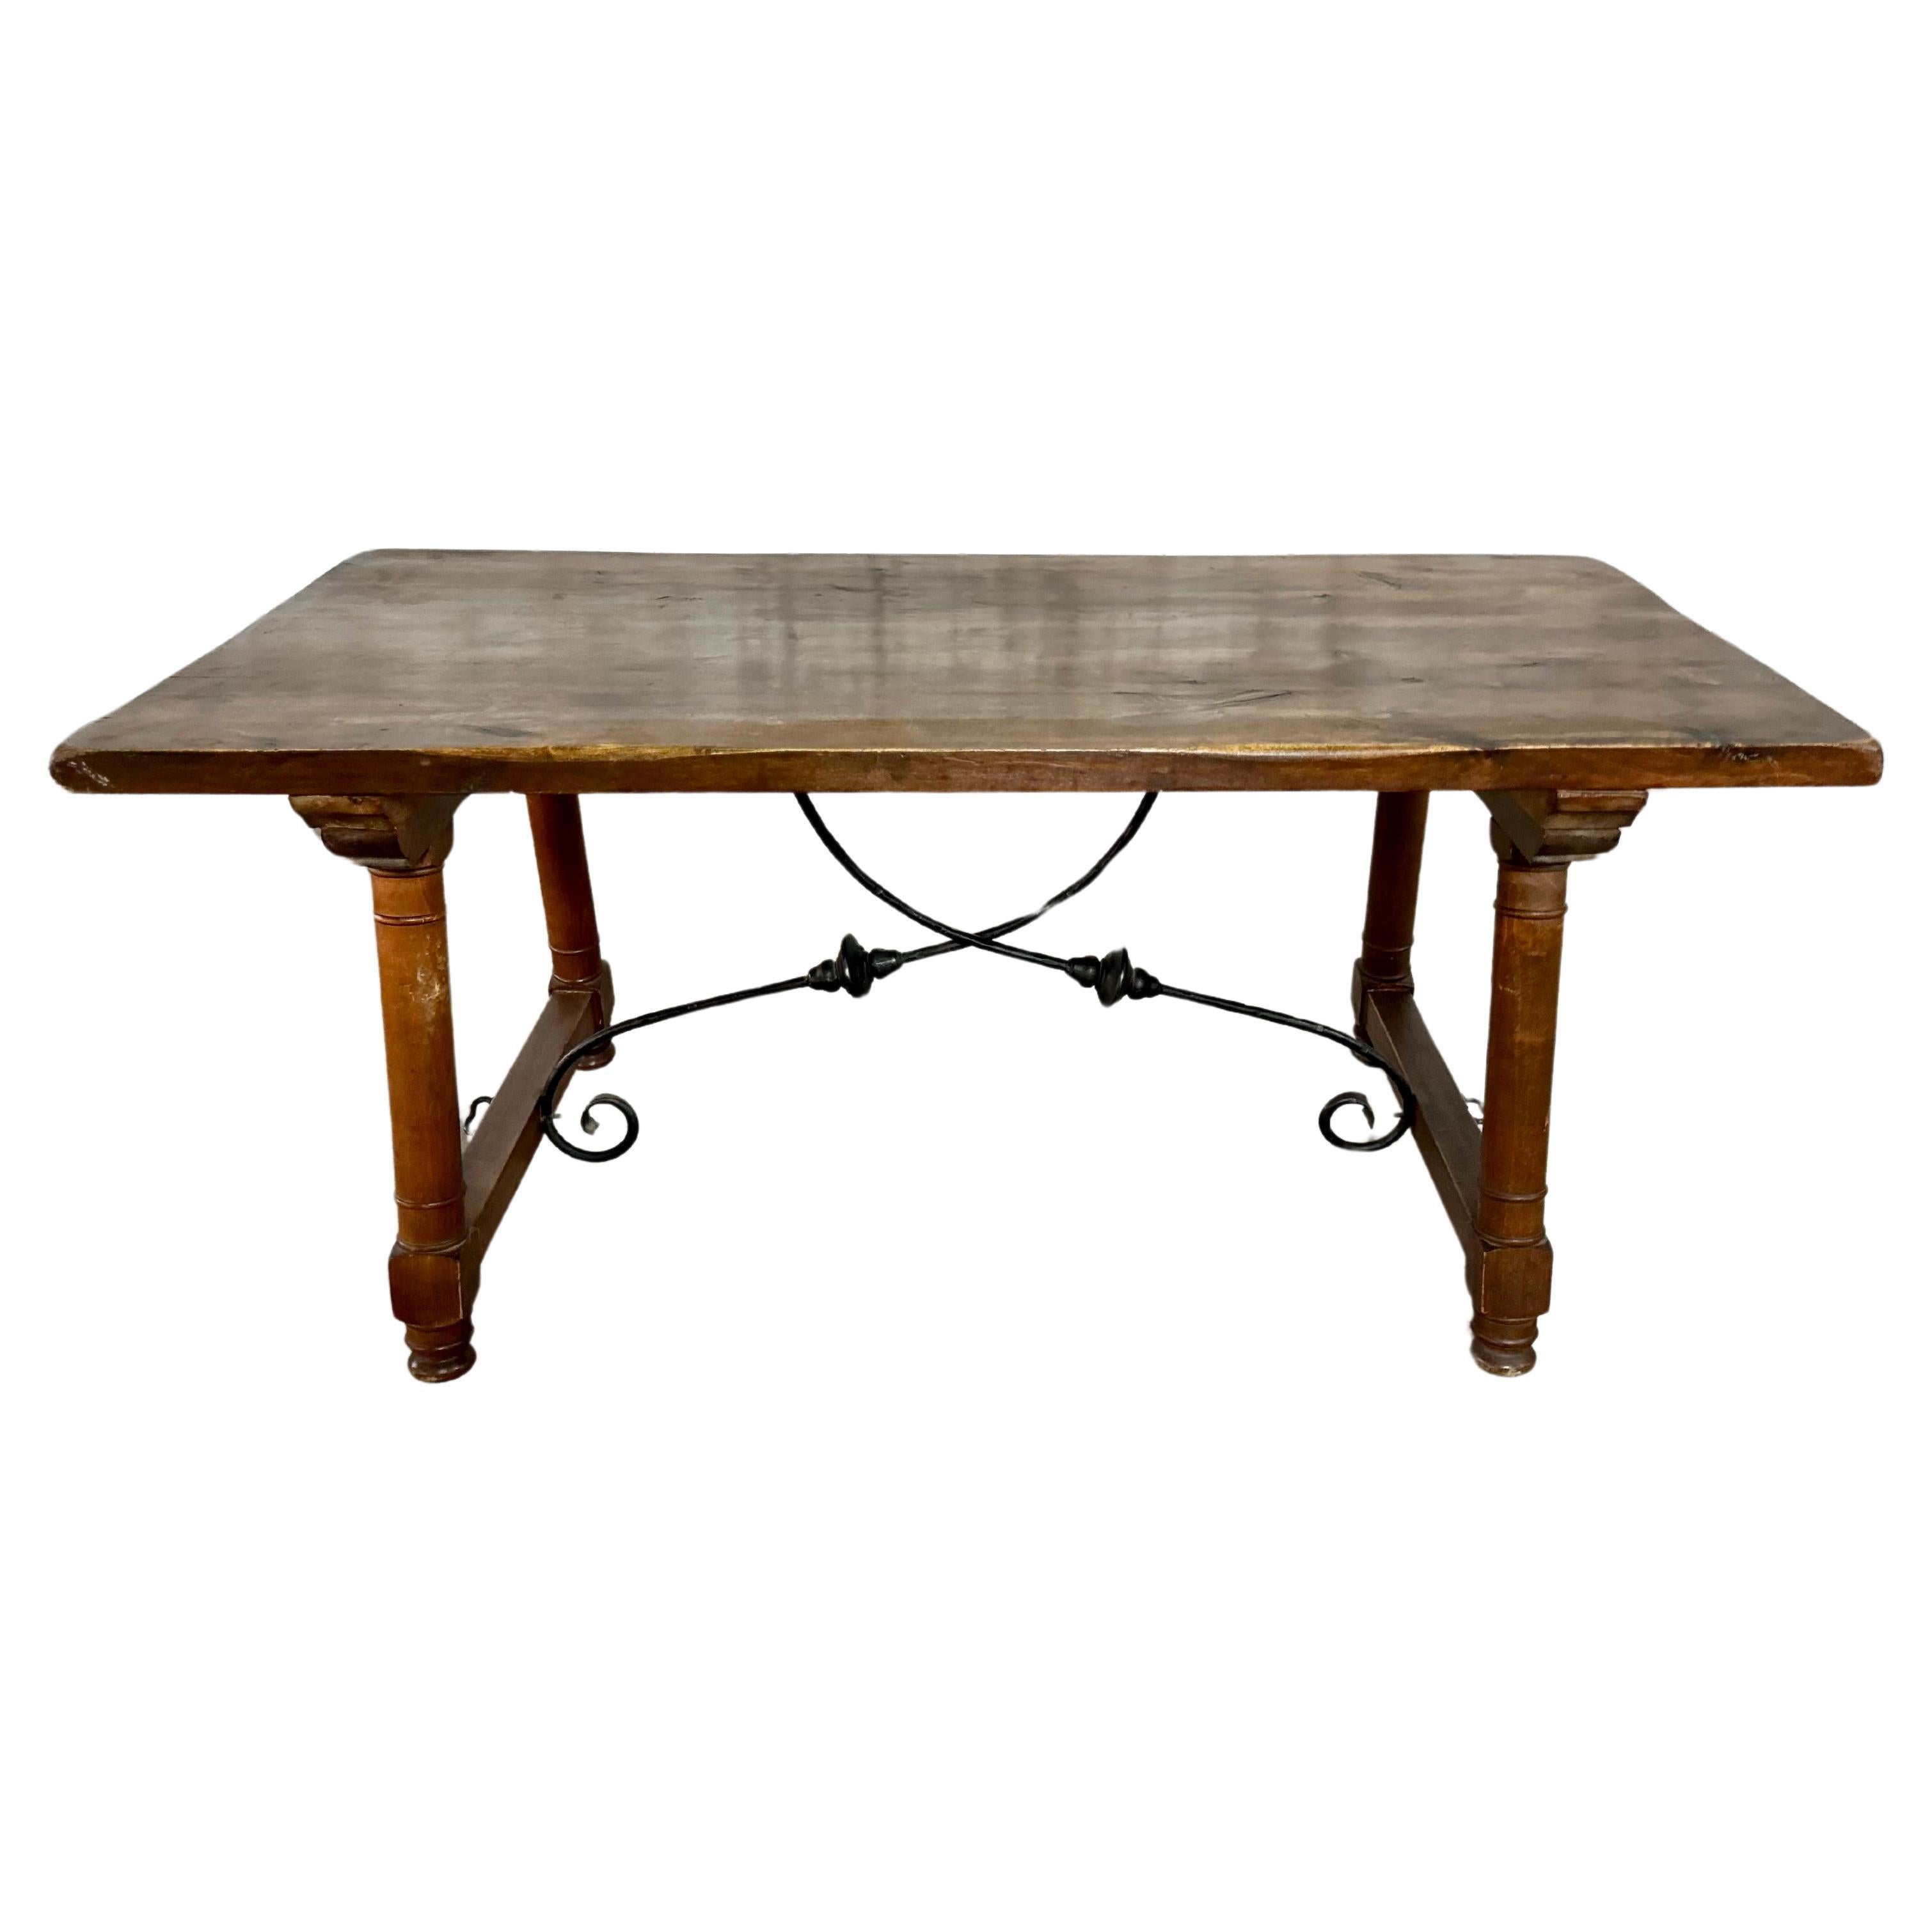 Antique Spanish Walnut Trestle Dining Breakfast Table or Desk With Iron Stretche For Sale